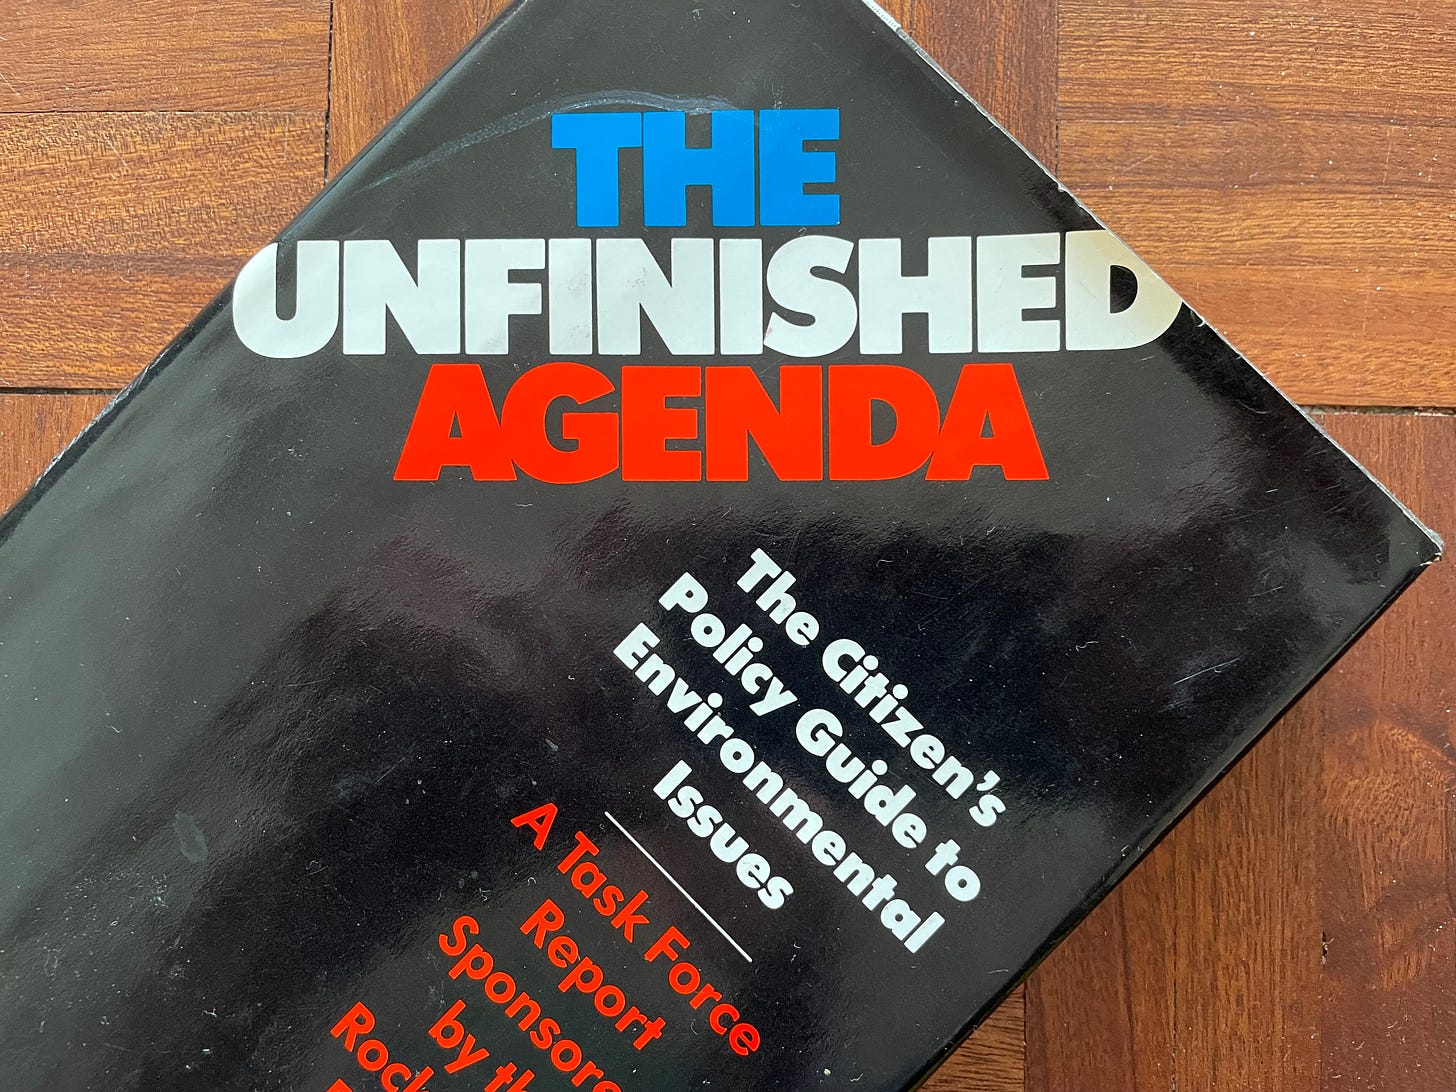 Photo of a copy of The Unfinished Agenda with a black gloss cover and the words written in blue, white and red